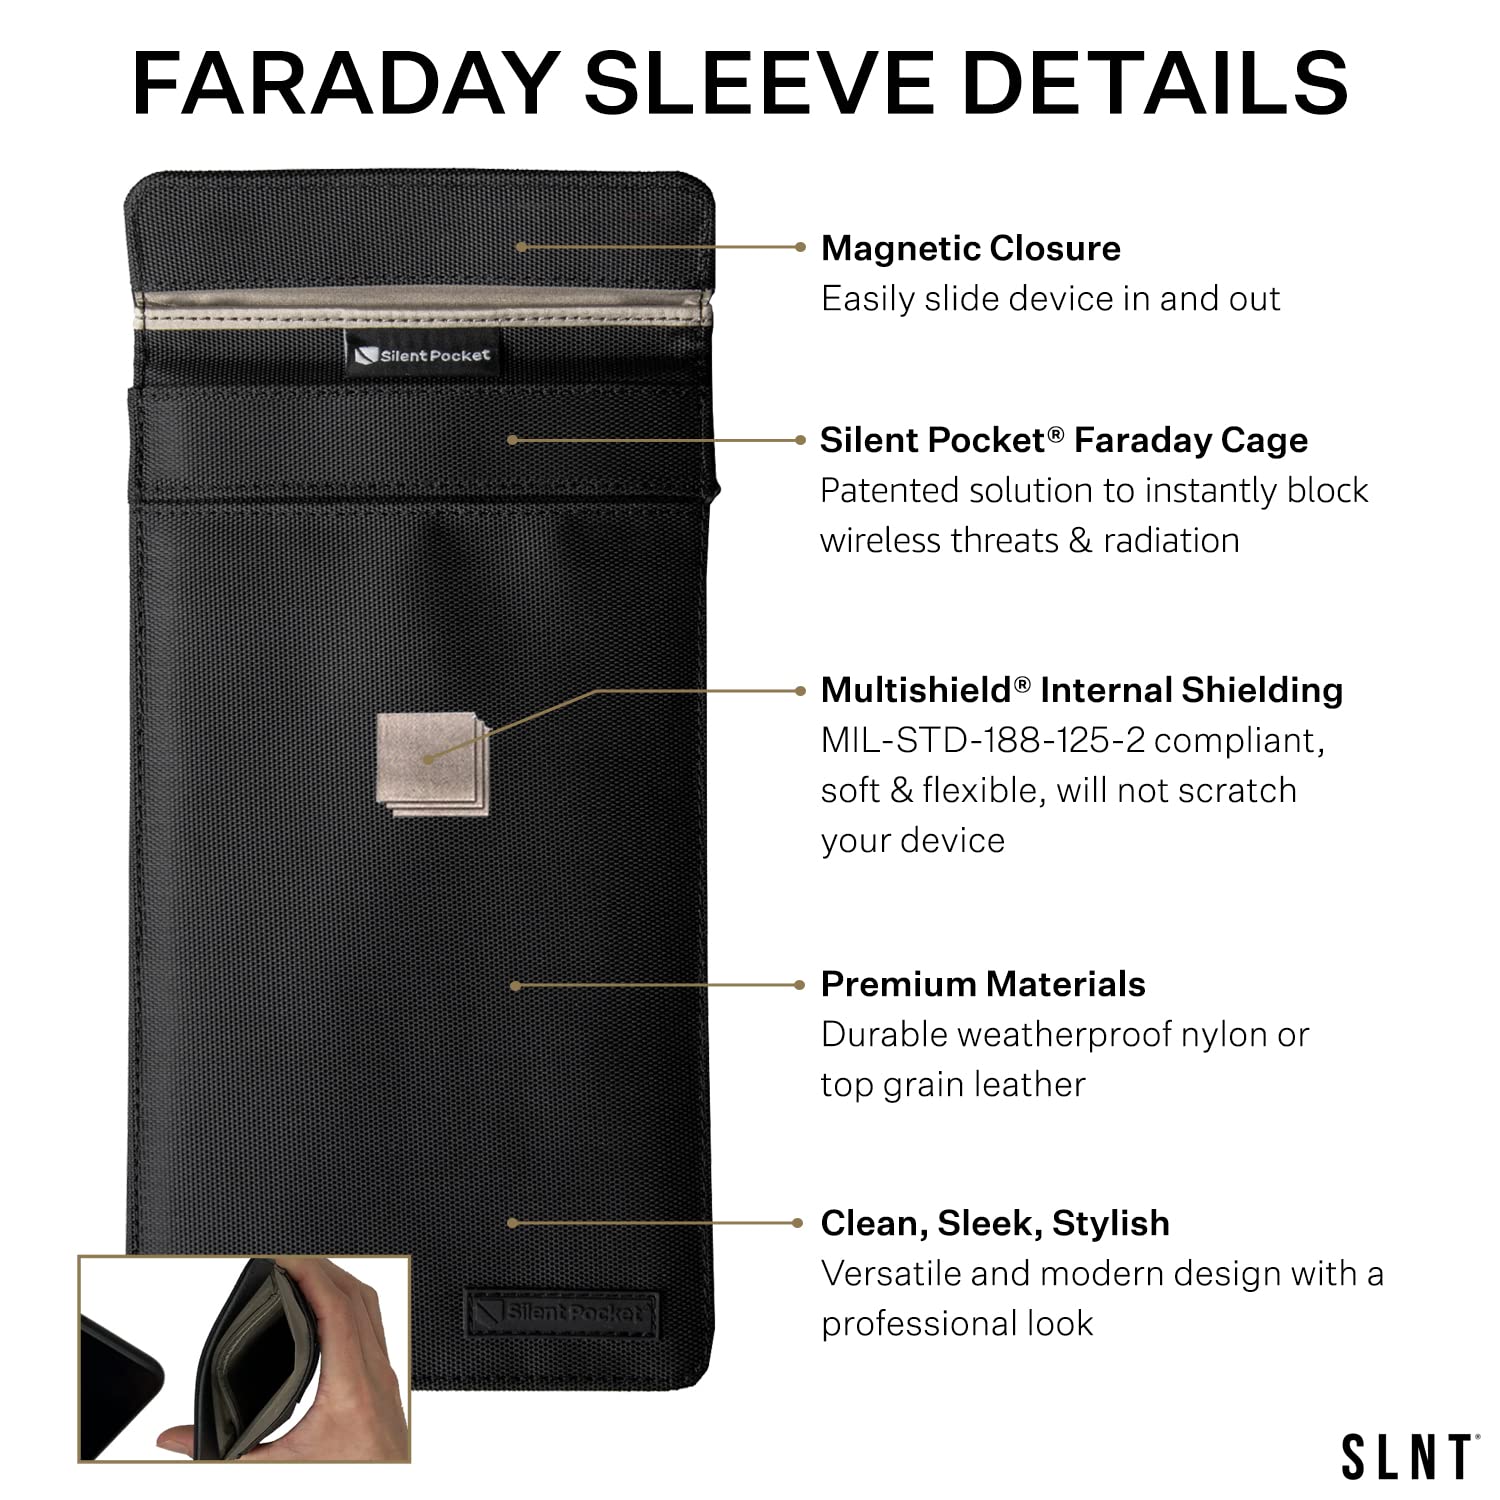 Silent Pocket SLNT Faraday Bag Smartphone Sleeve Leather or Waterproof Nylon - Signal Blocking Device Shielding for iPhone, Samsung Galaxy, fits Most Phones, Anti-Hacking (Grey Nylon, Small)